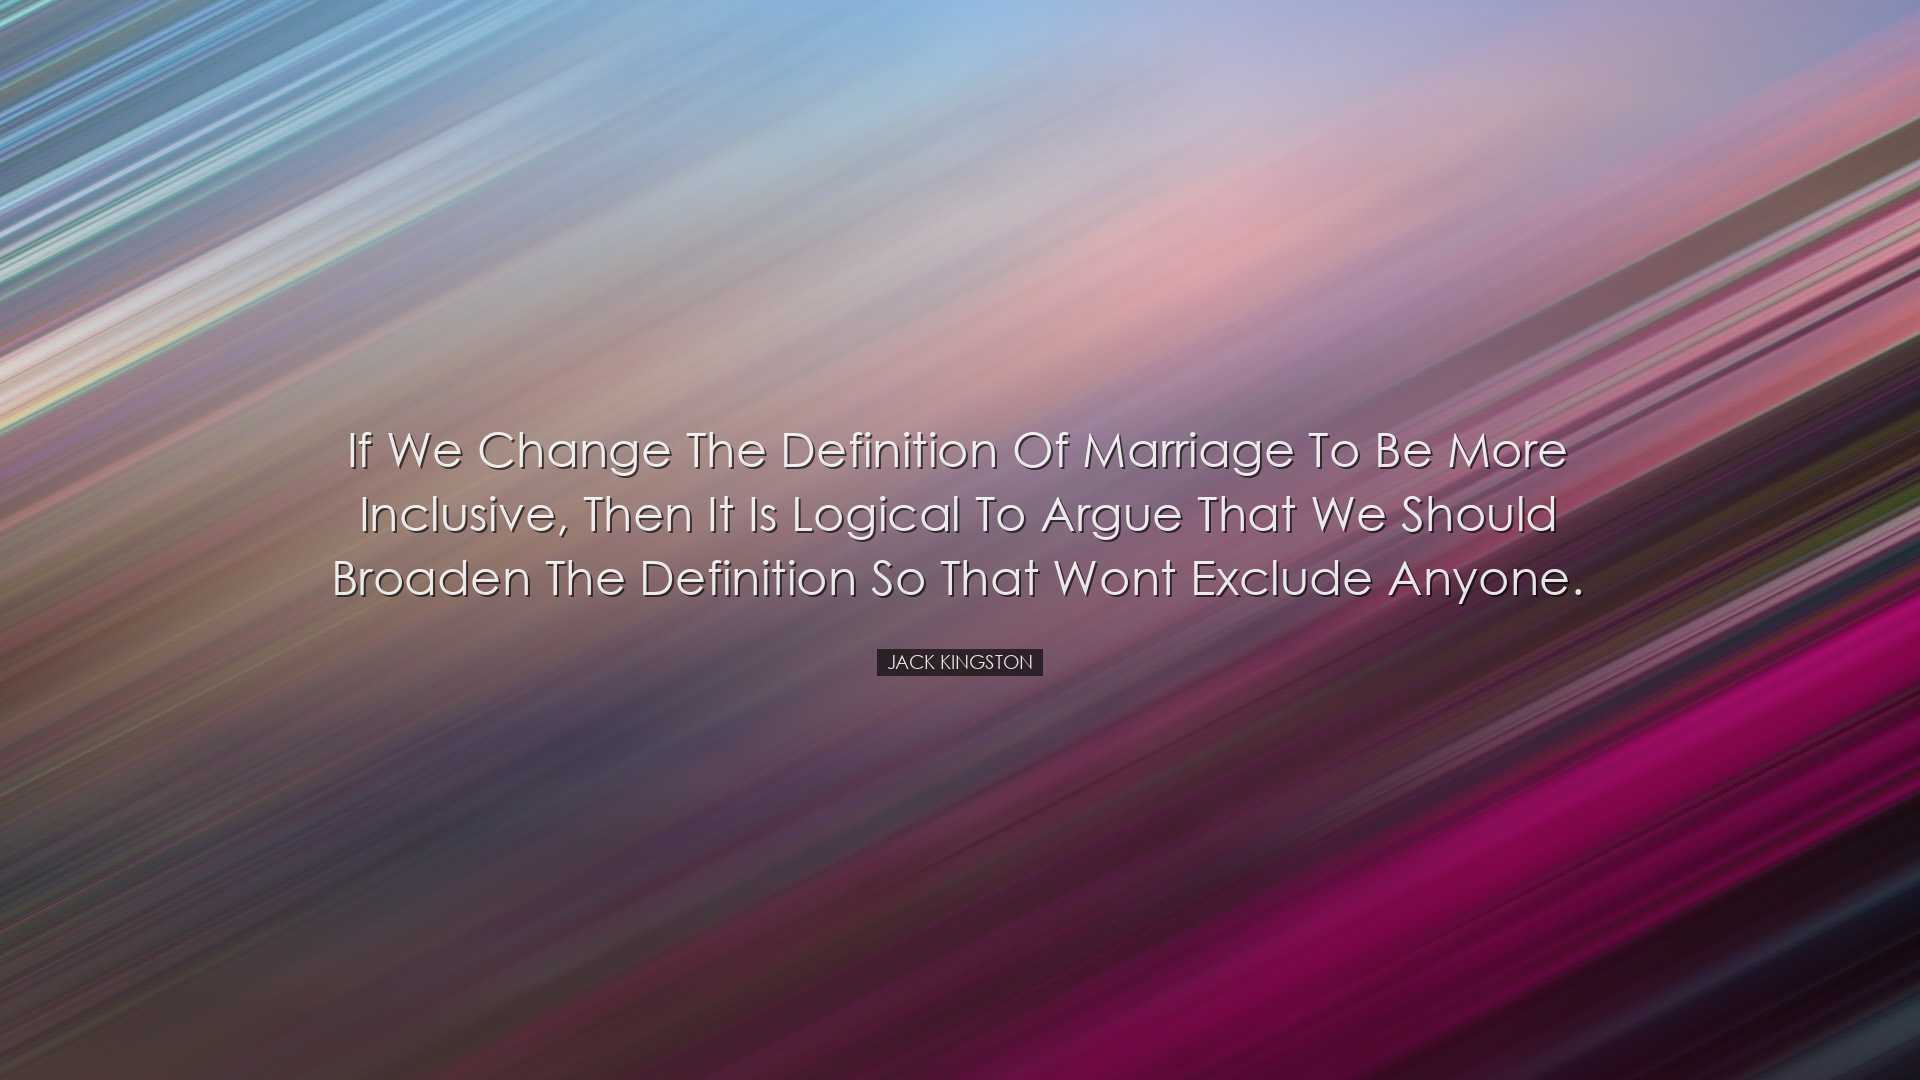 If we change the definition of marriage to be more inclusive, then